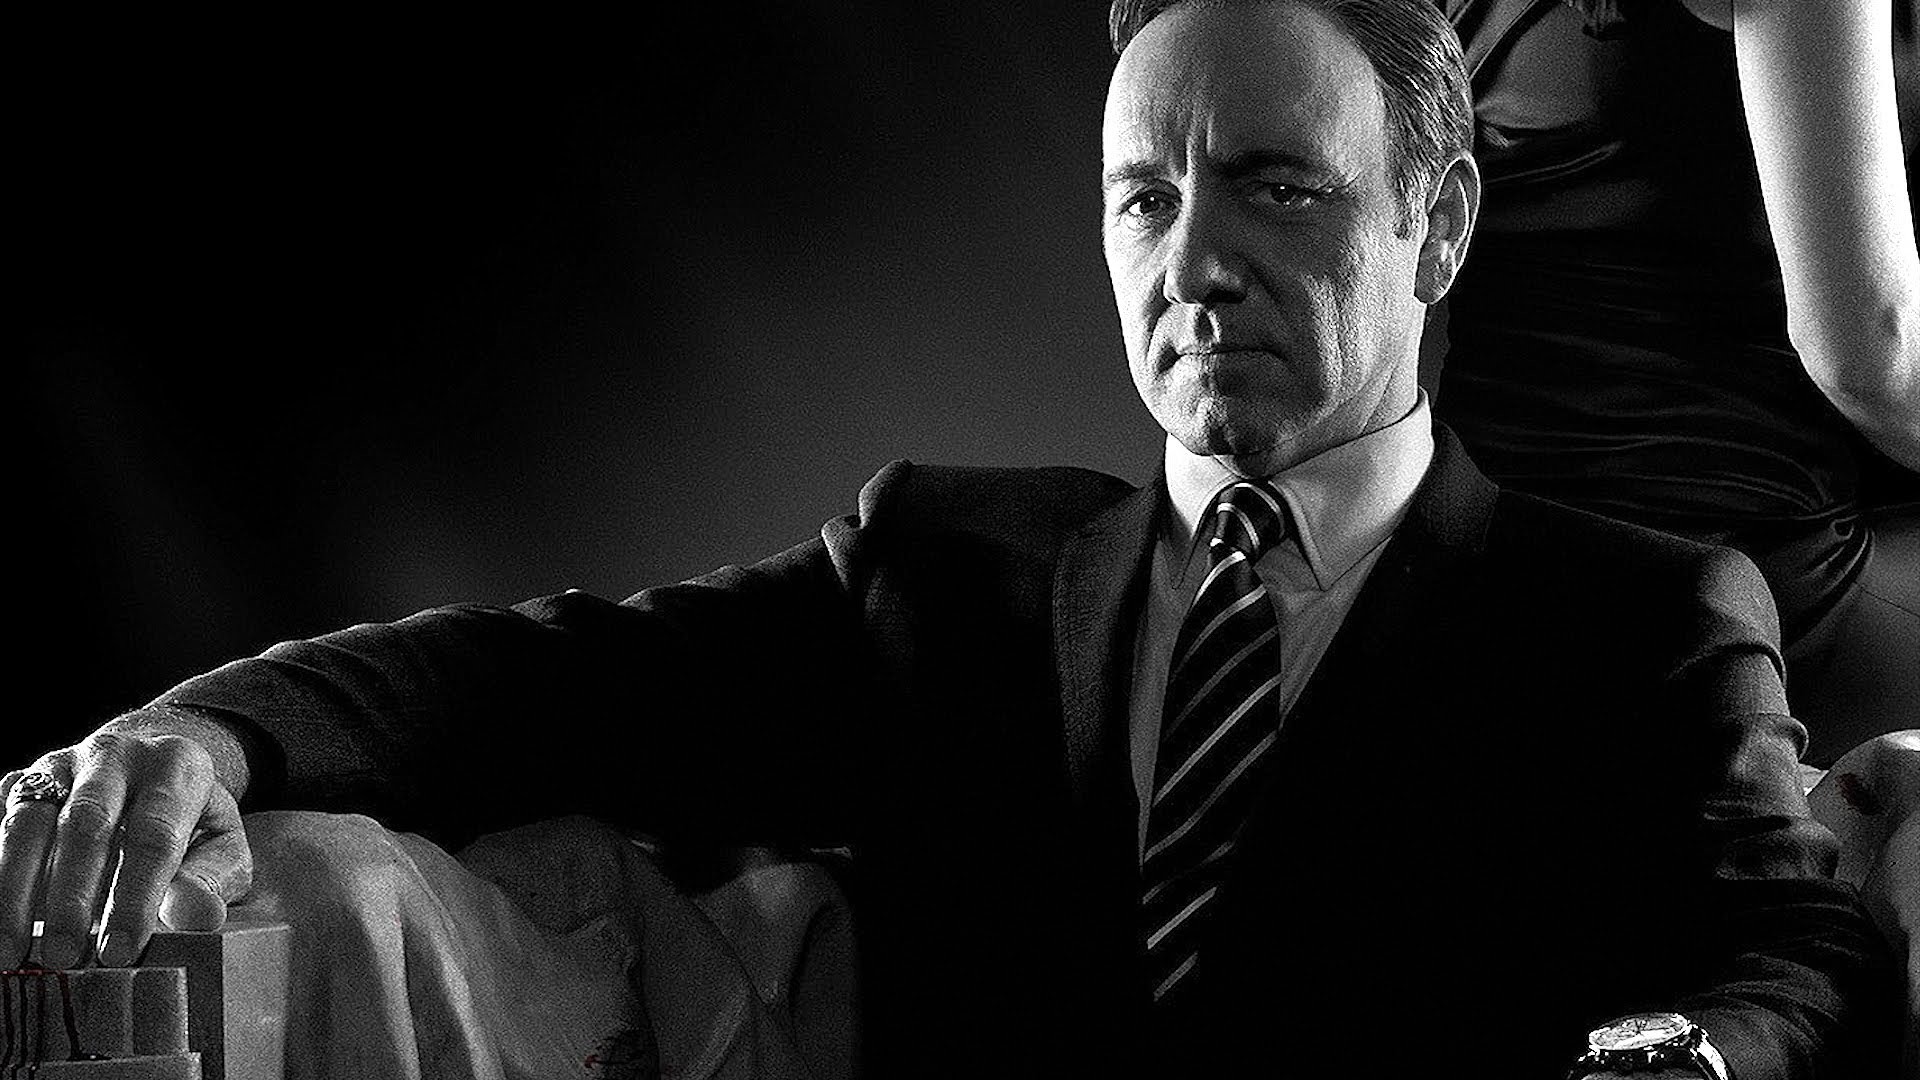 house of cards wallpaper,black,photograph,suit,black and white,photography